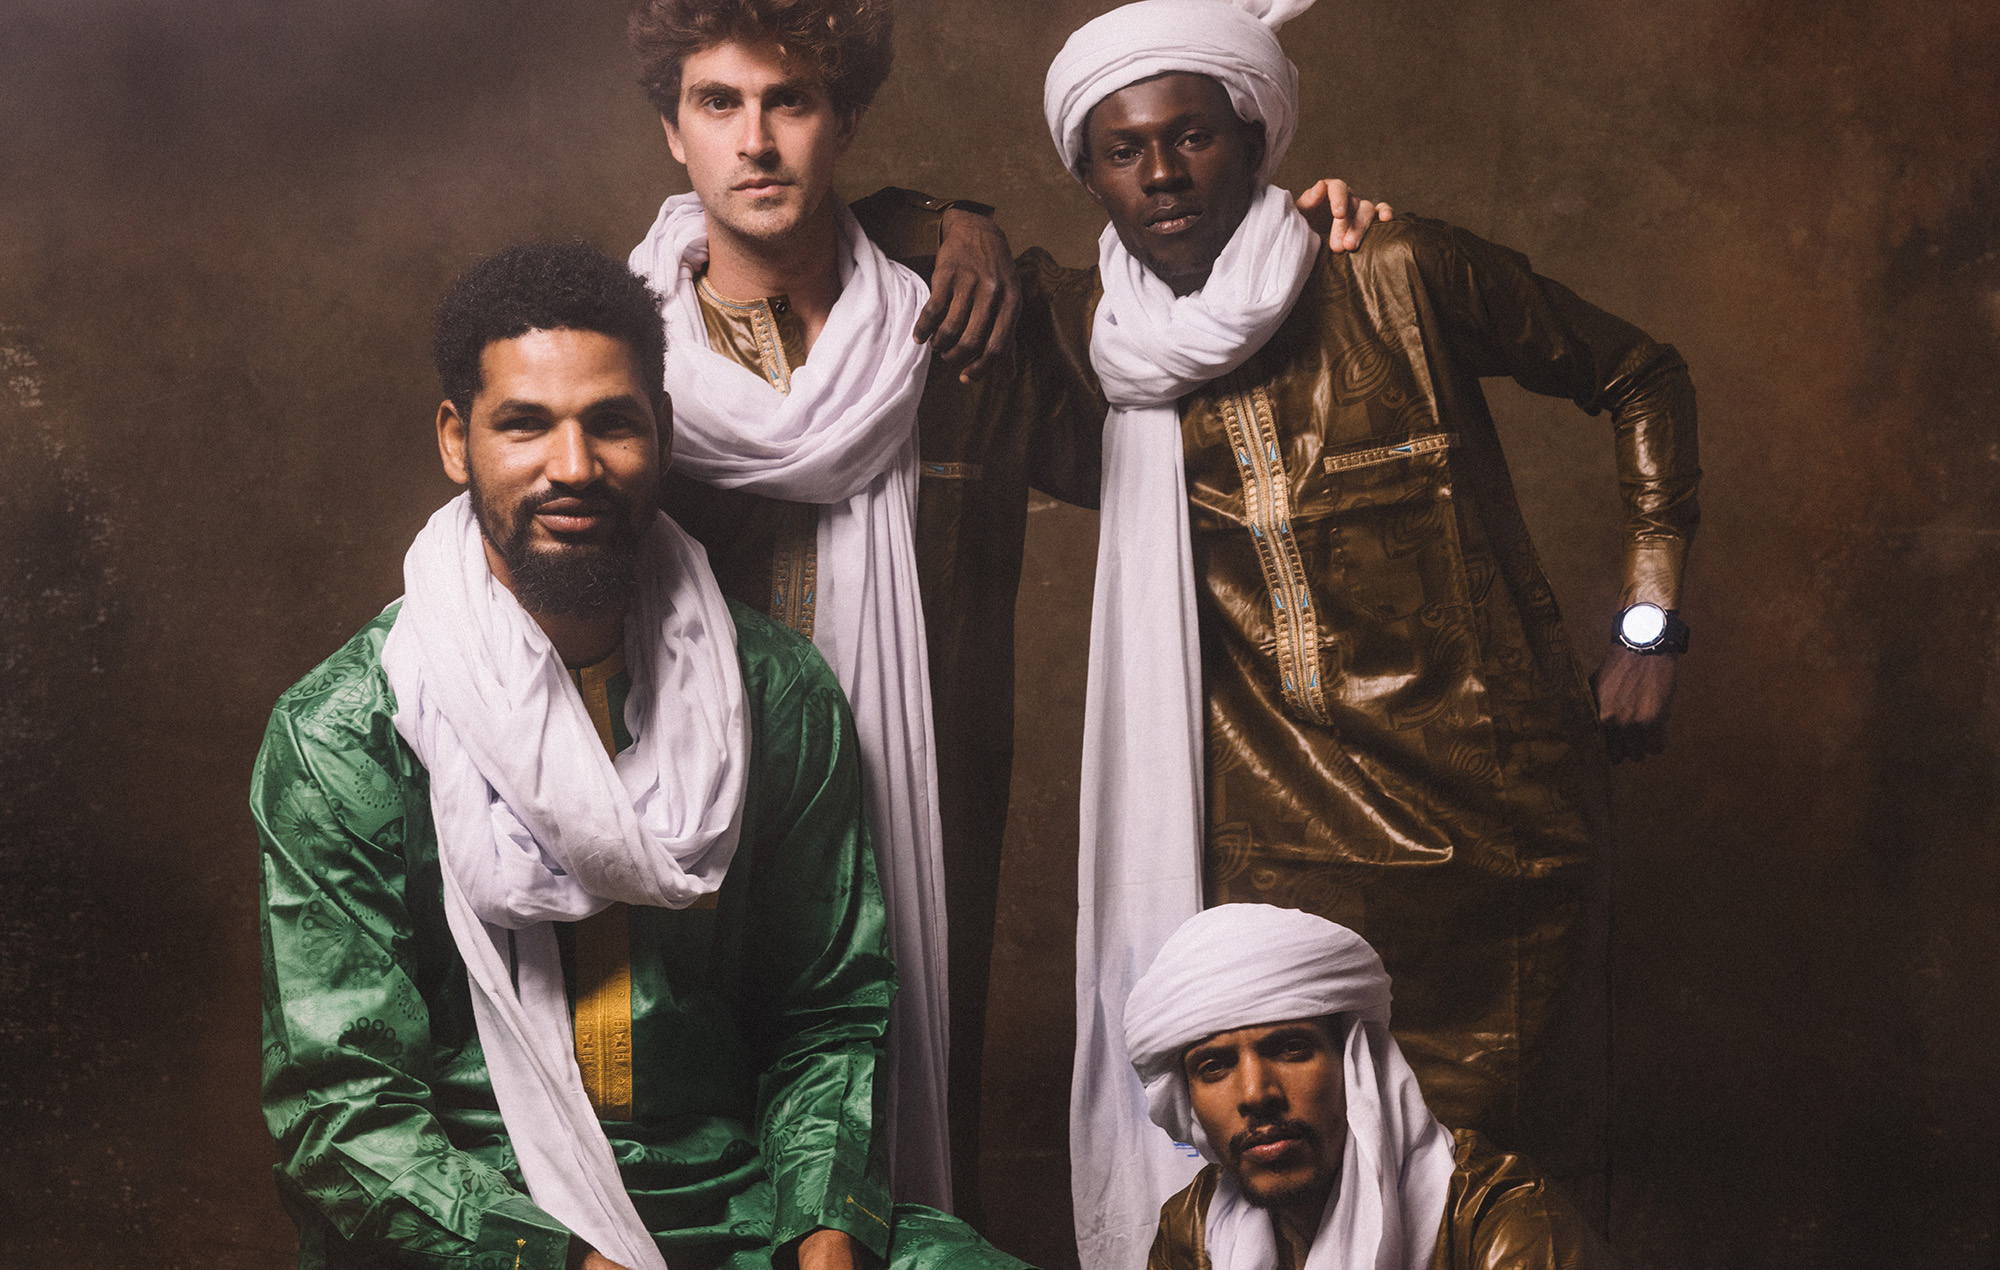 Mdou Moctar: one of the world’s most exciting and important rock bands